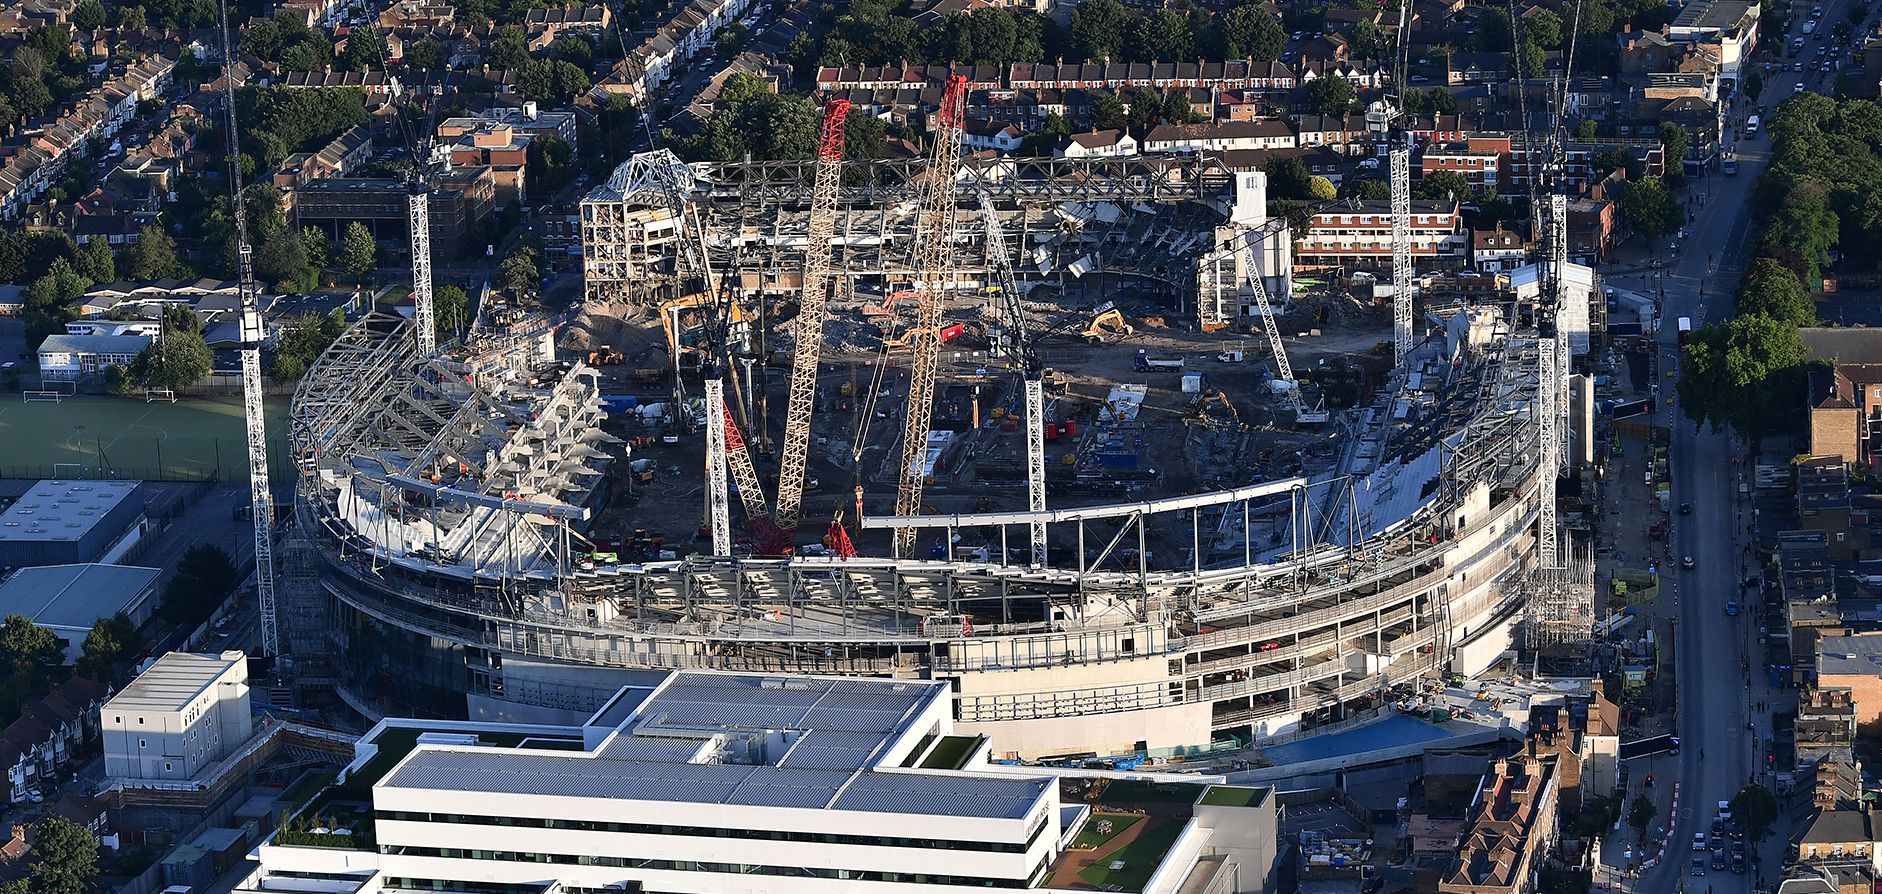 Full house: Comparing the world’s largest sporting venues